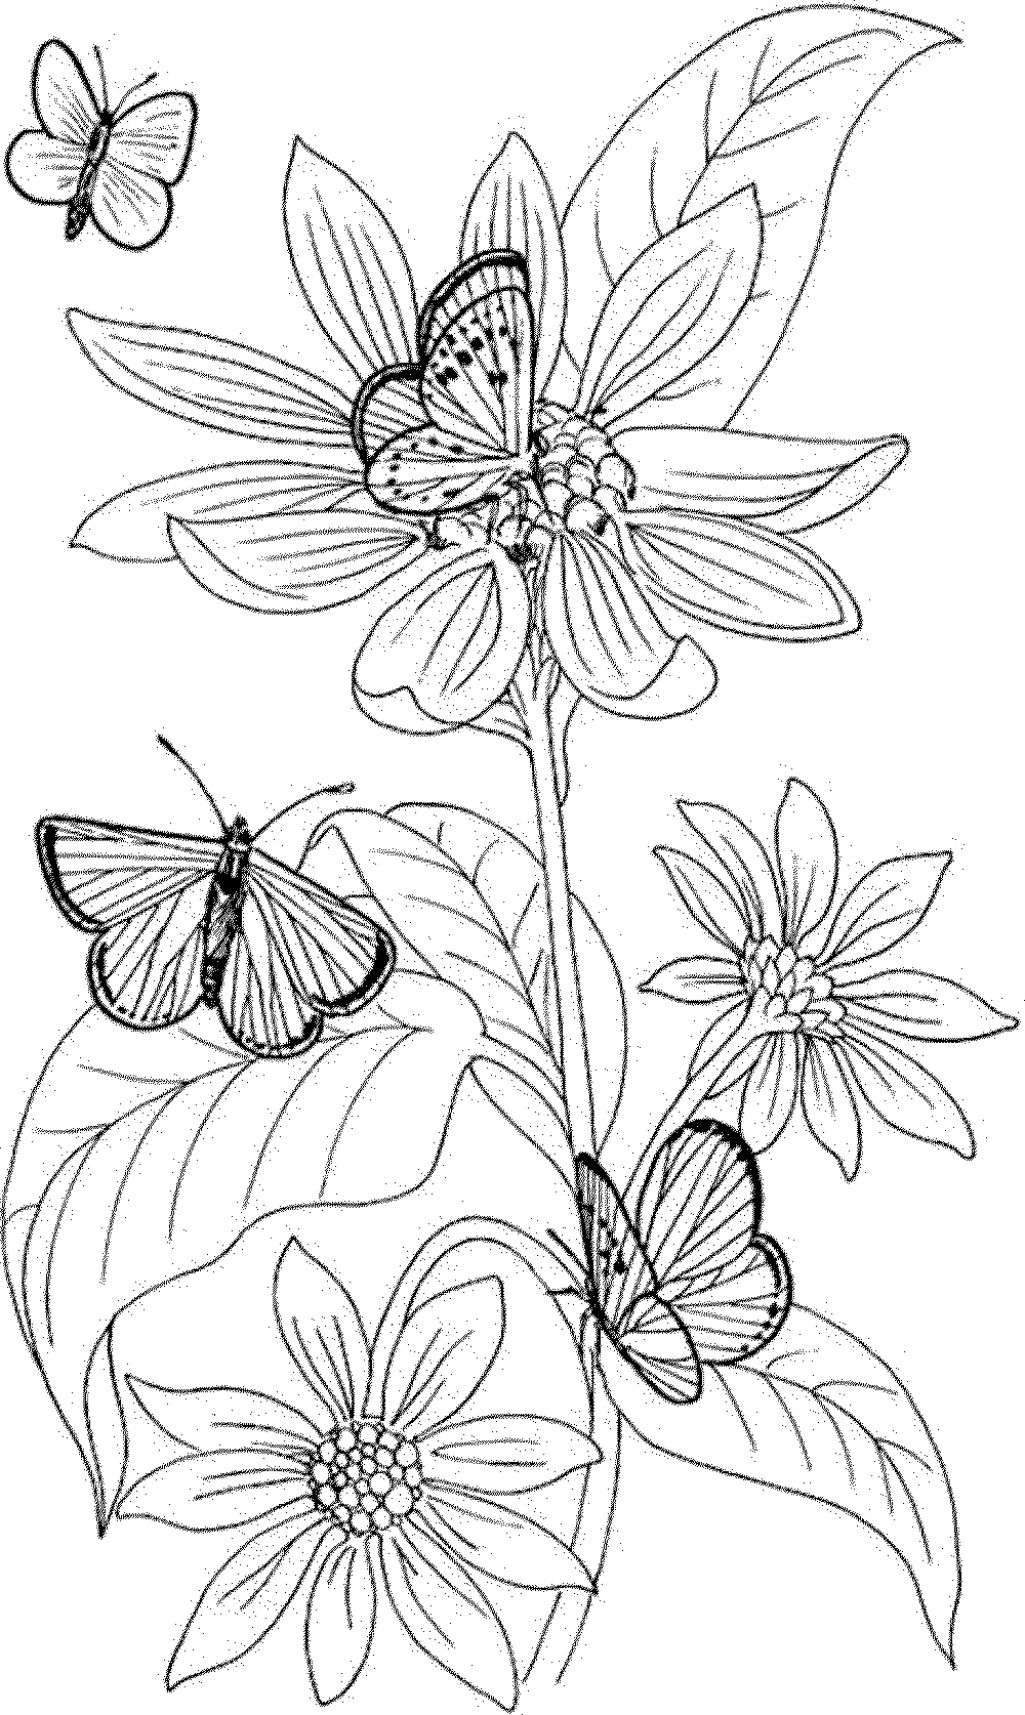 Pansy Flower Coloring Page at GetColorings.com | Free printable